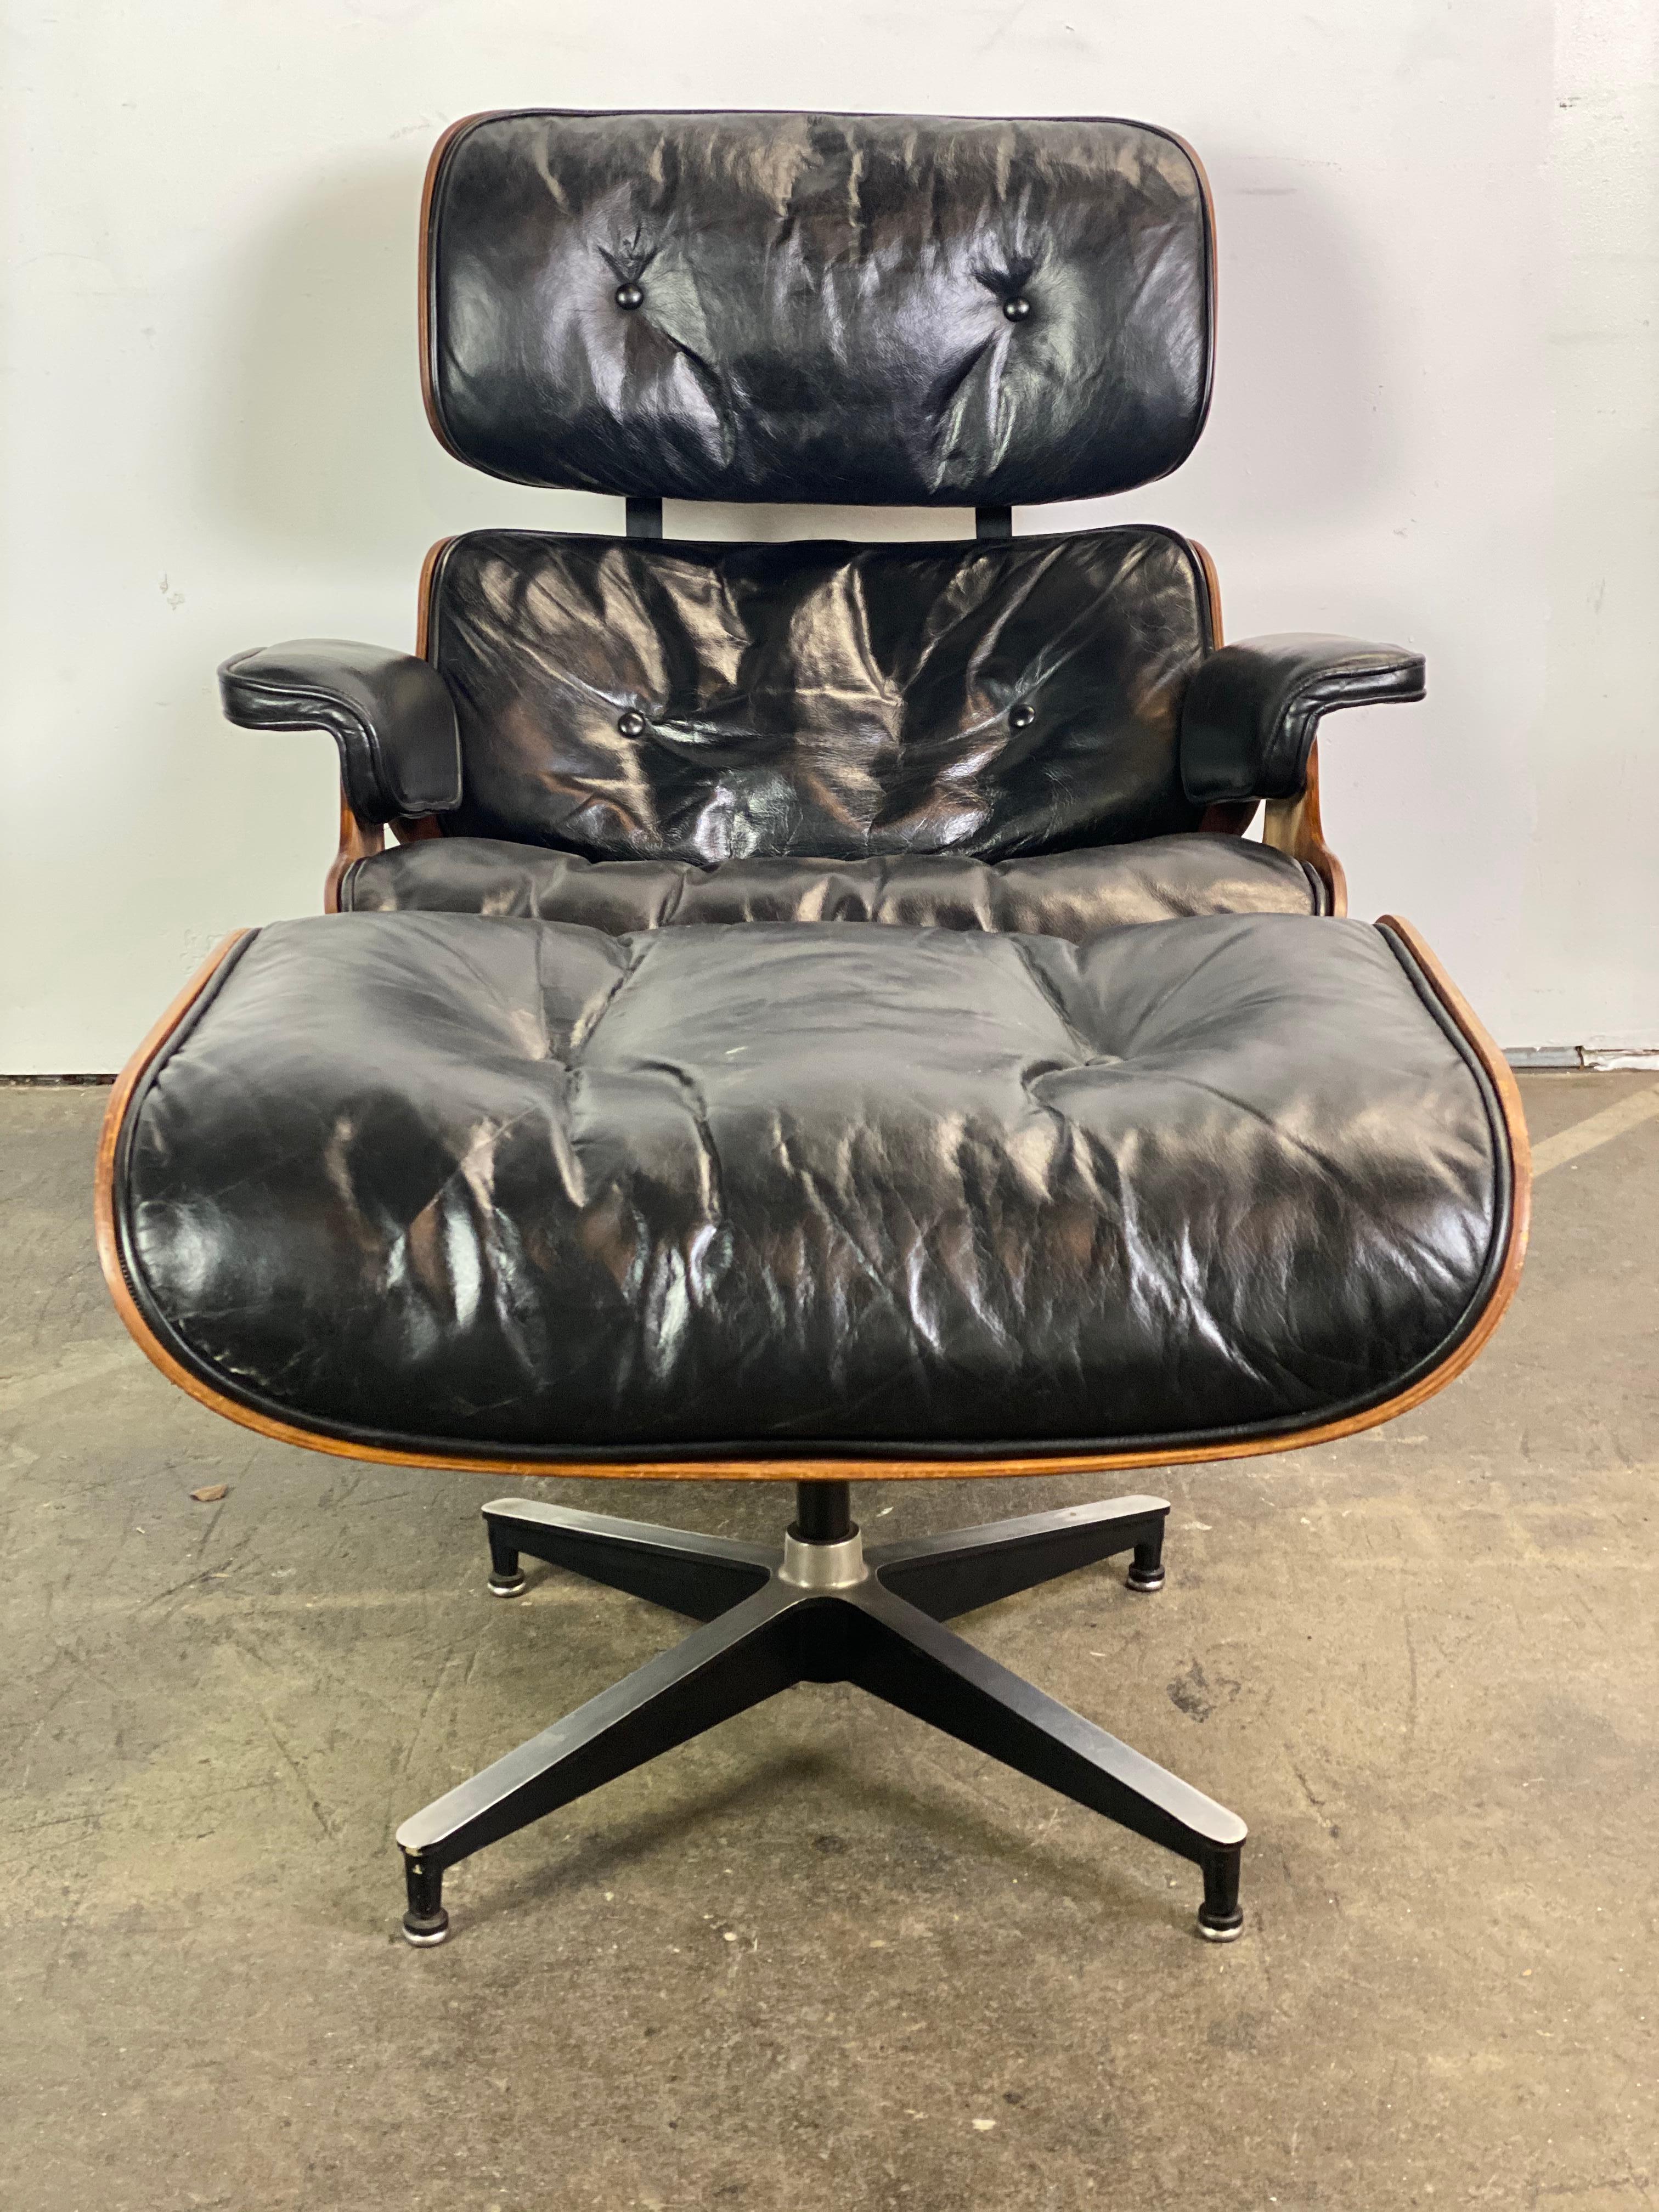 Gorgeous Classic Eames lounge chair and ottoman. Executed in. Brazilian rosewood and original black leather. Replaced seat shock mounts ($750 value). Signed and guaranteed authentic. Leather cleaned and tuned up, wood refinished. All foot glides